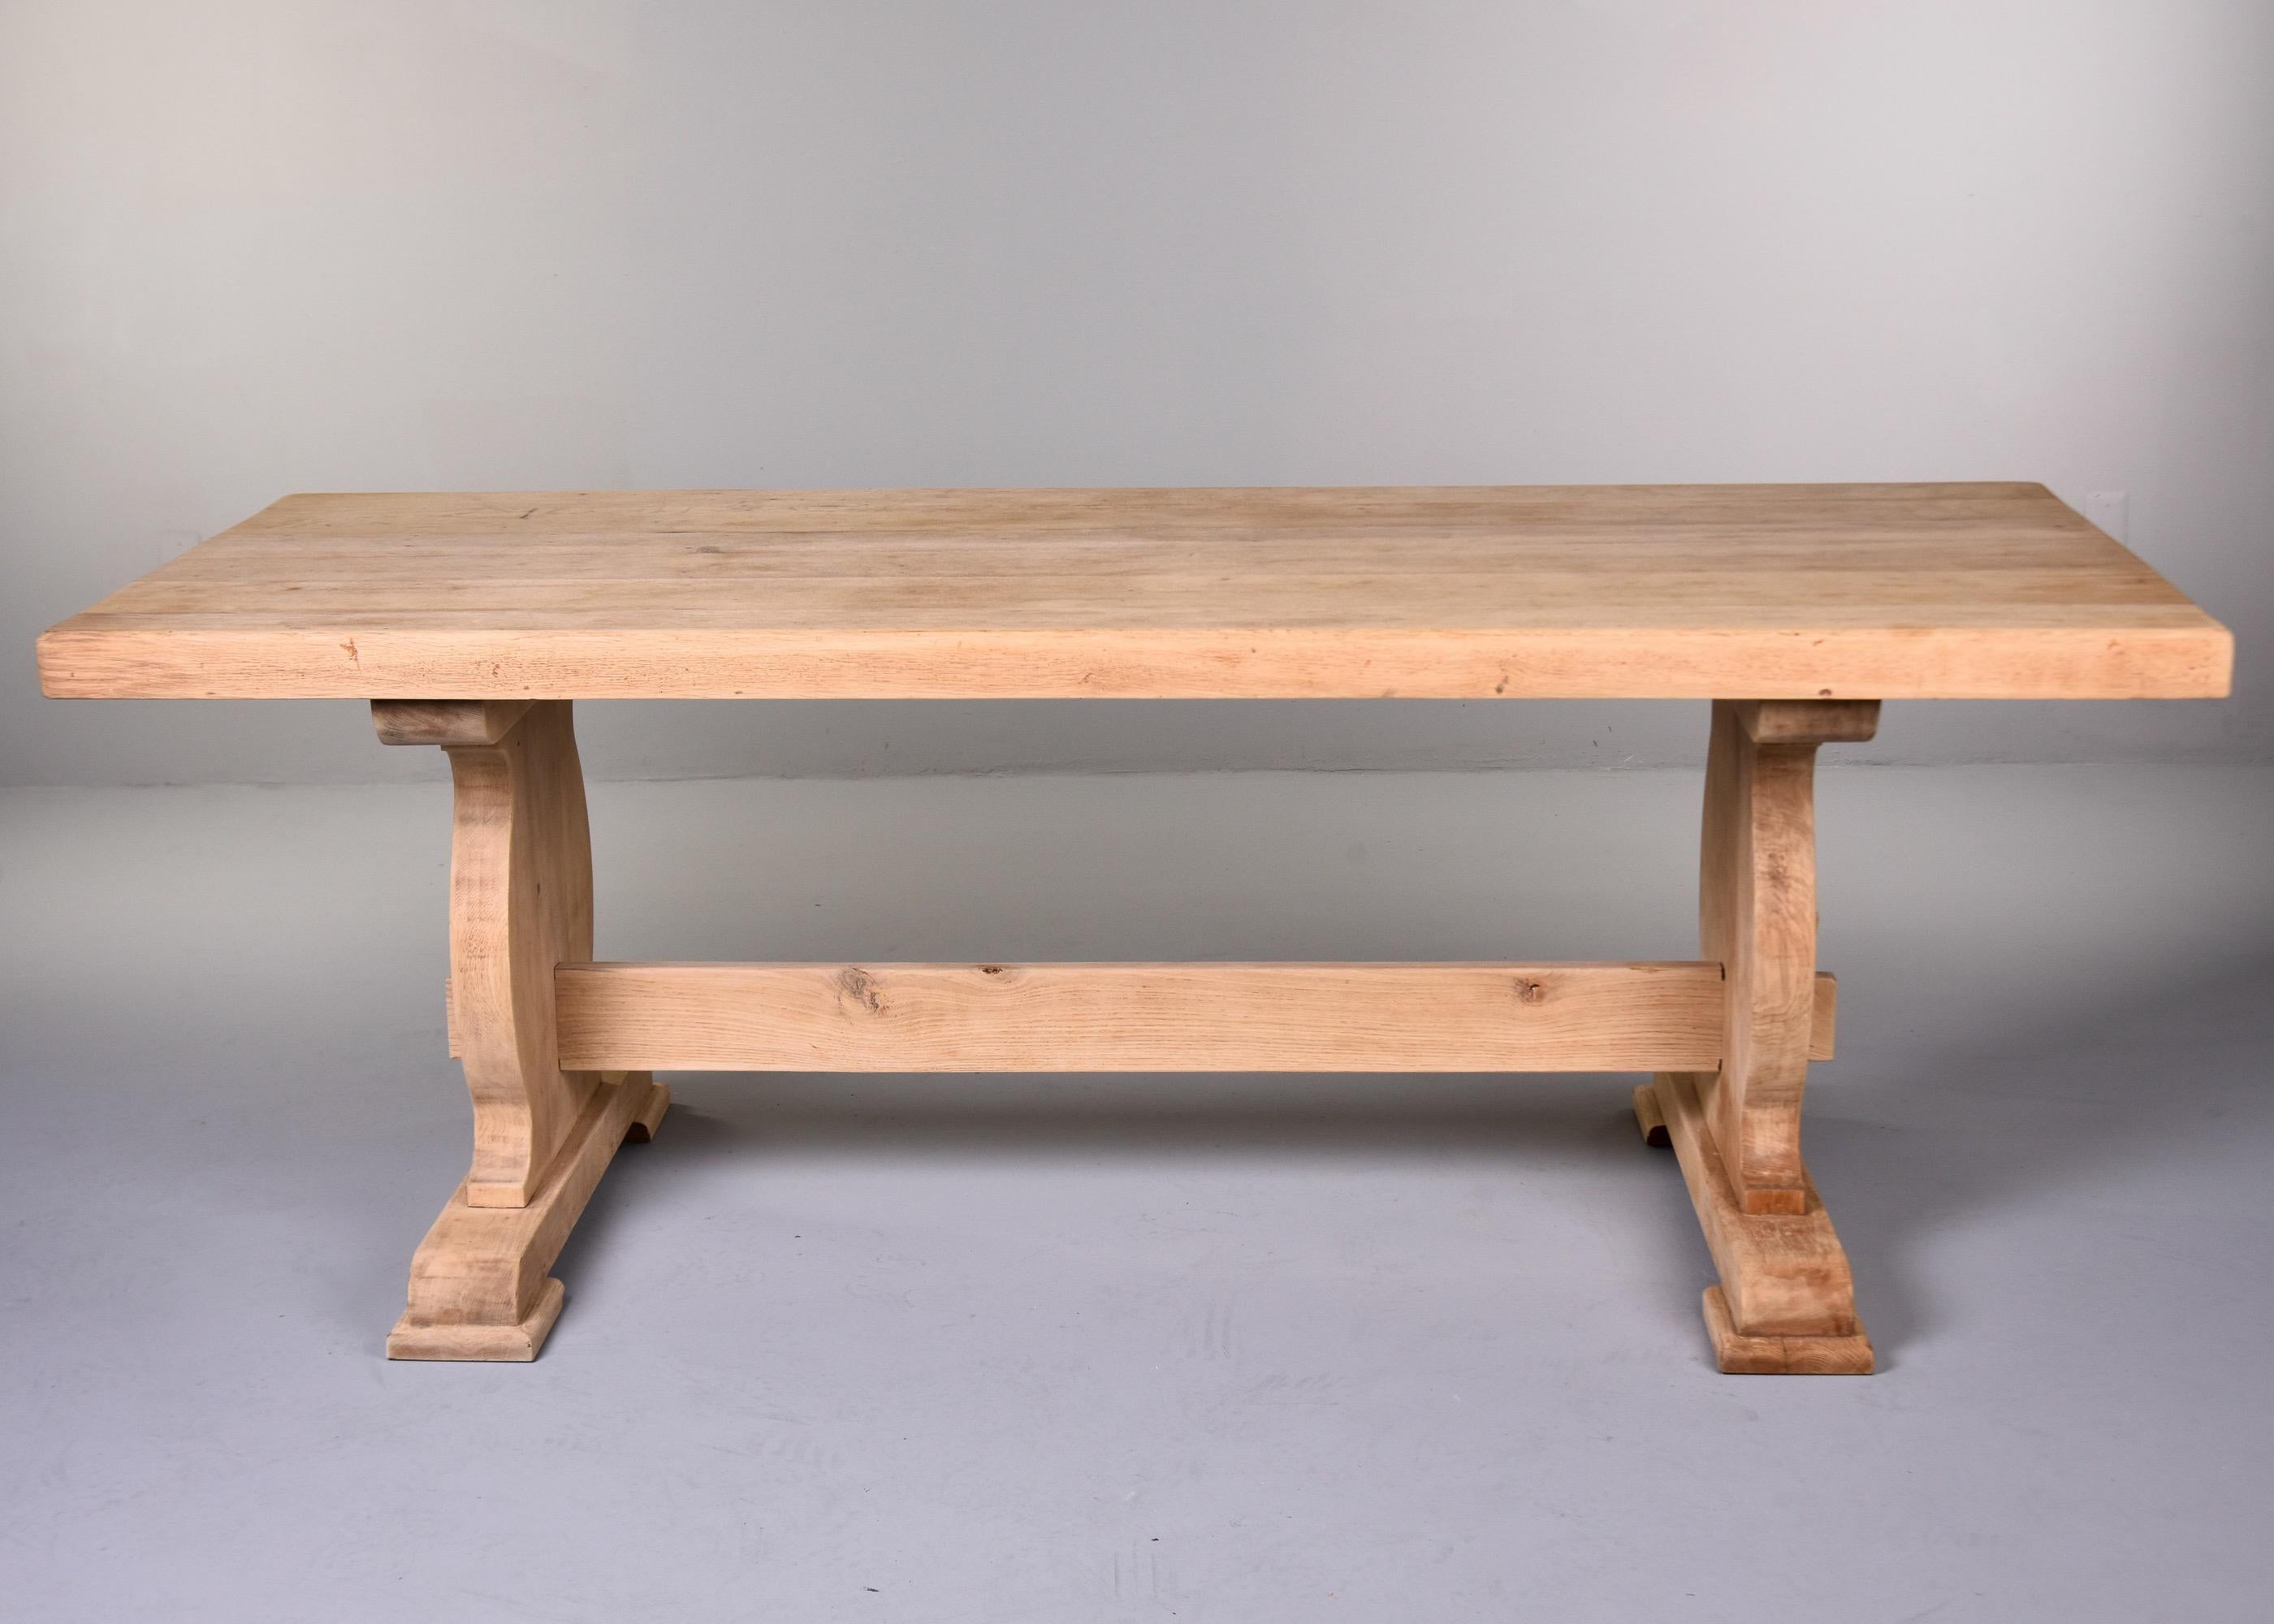 20th Century Circa 1900 Sanded Bare Oak French Country Trestle Table For Sale